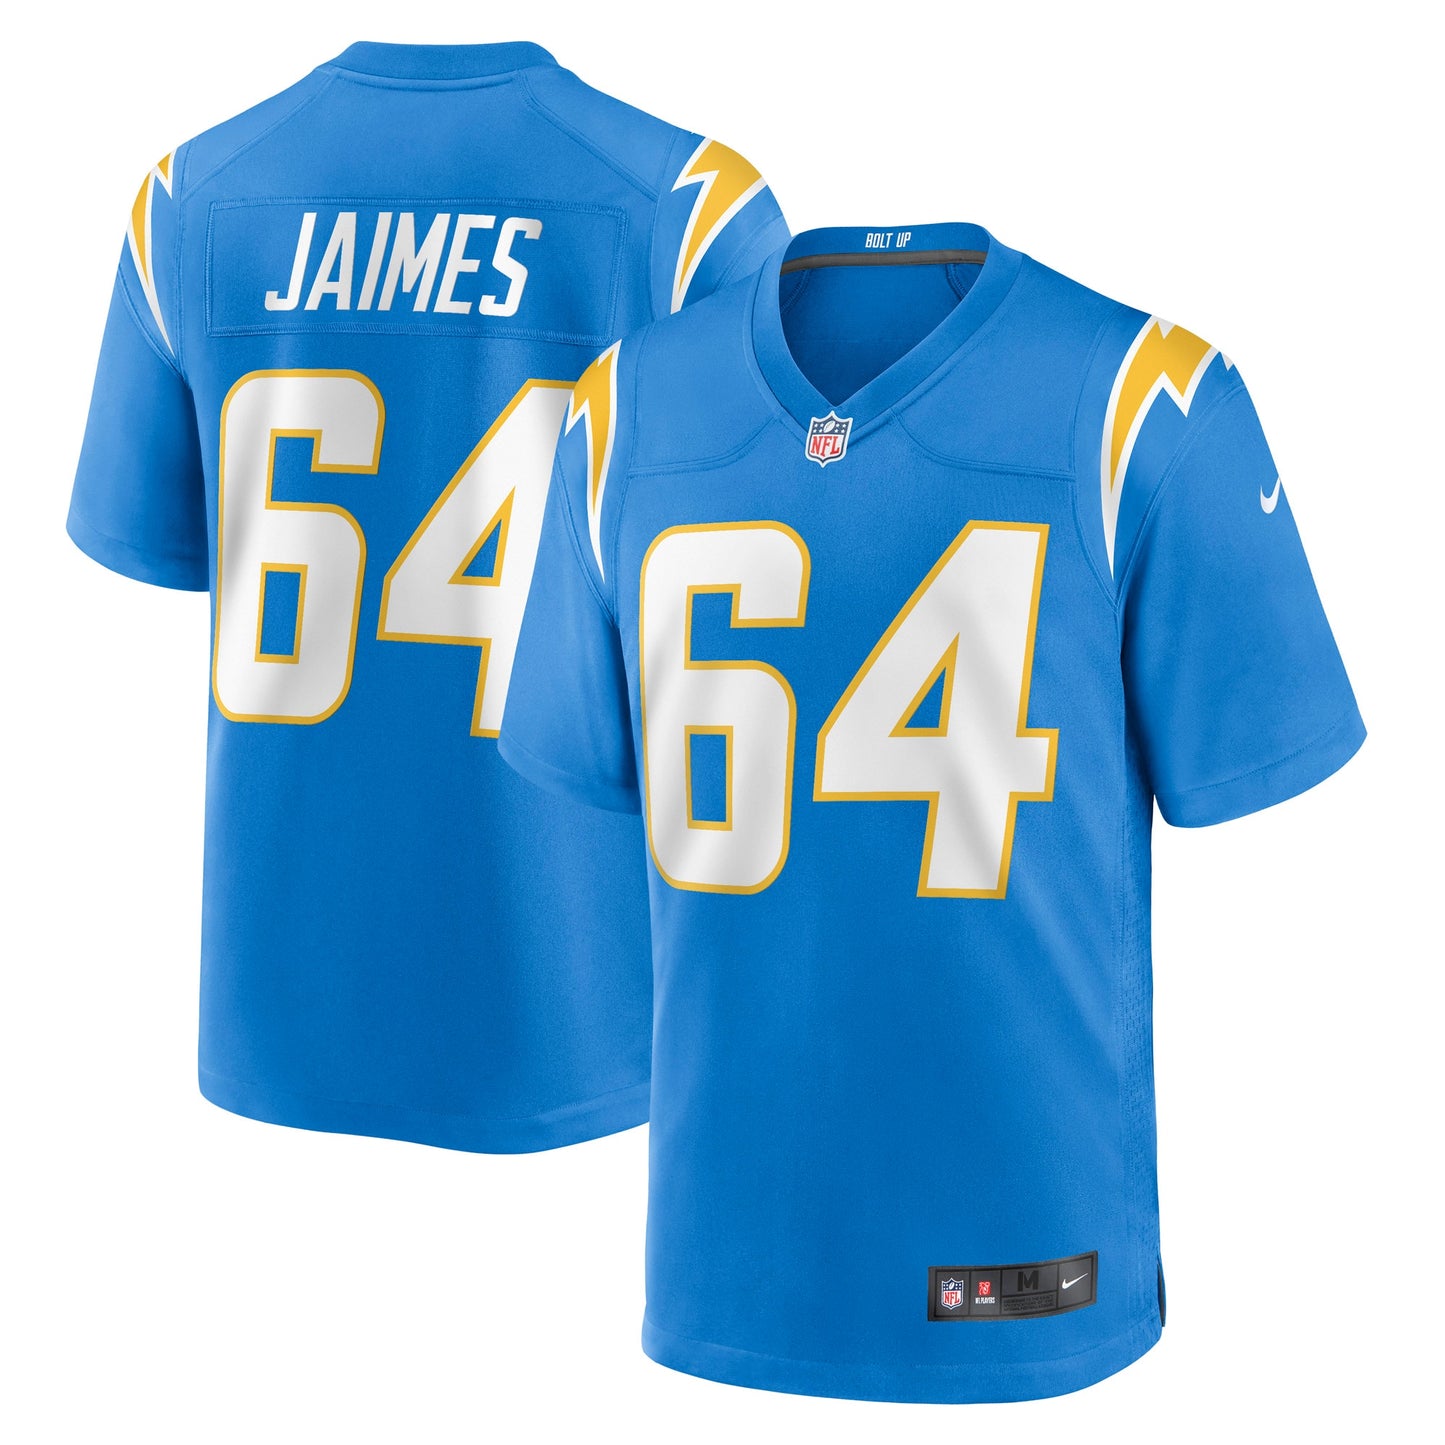 Brenden Jaimes Los Angeles Chargers Nike Game Jersey - Powder Blue